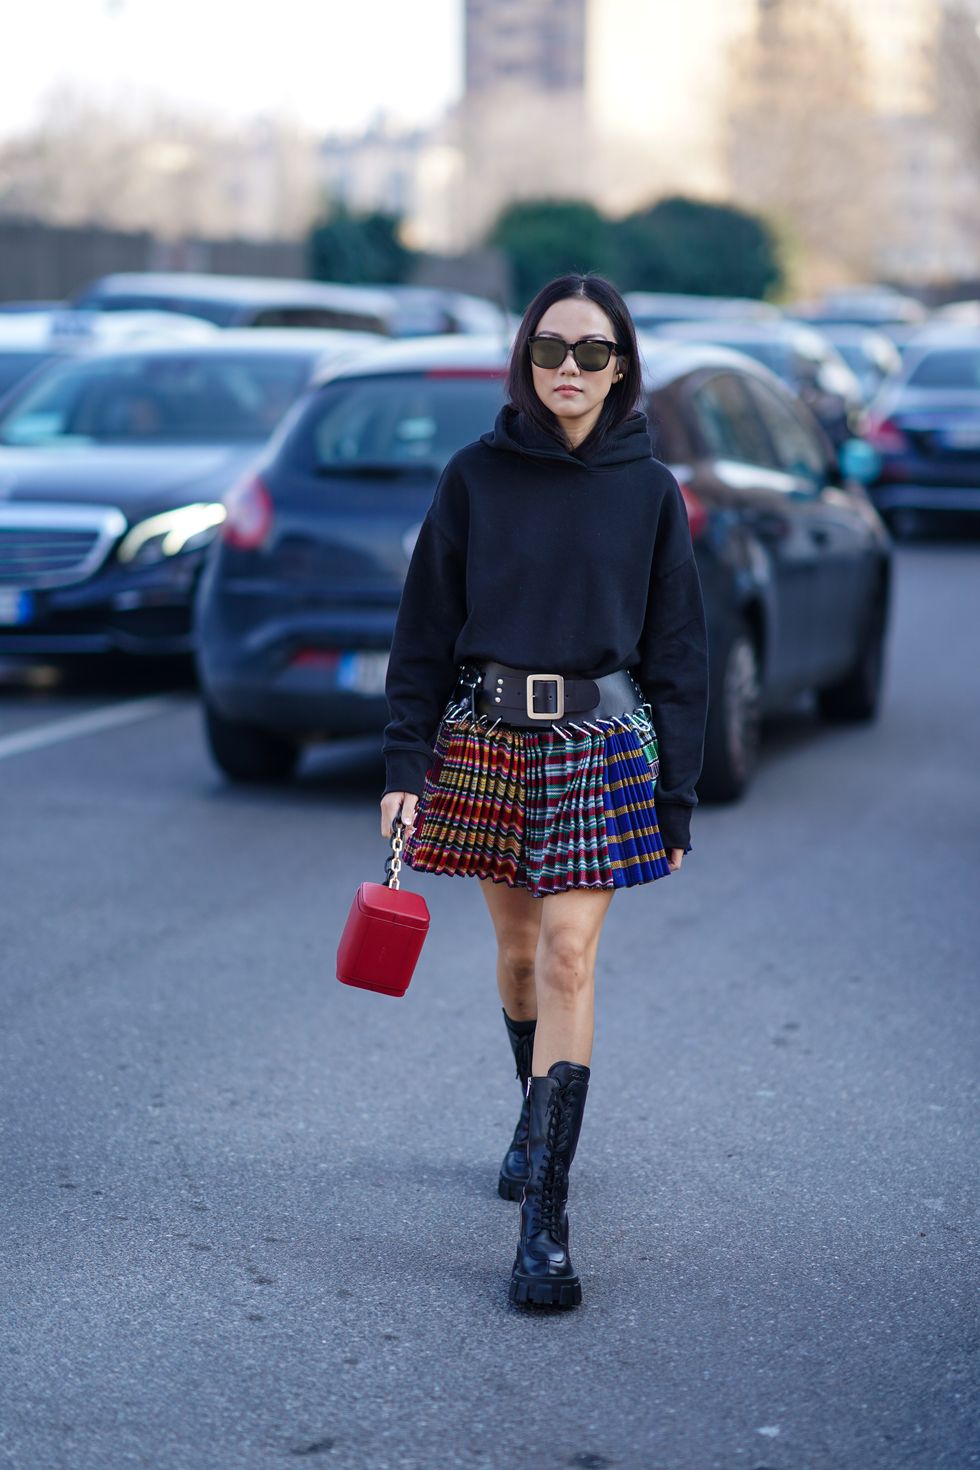 milan, italy february 22 yoyo cao wears sunglasses, a black hooded sweatshirt, a black belt, a colorful pleated mini skirt, a red bag, black prada mid calf lace up platform boots, outside msgm, during milan fashion week fallwinter 2020 2021 on february 22, 2020 in milan, italy photo by edward berthelotgetty images